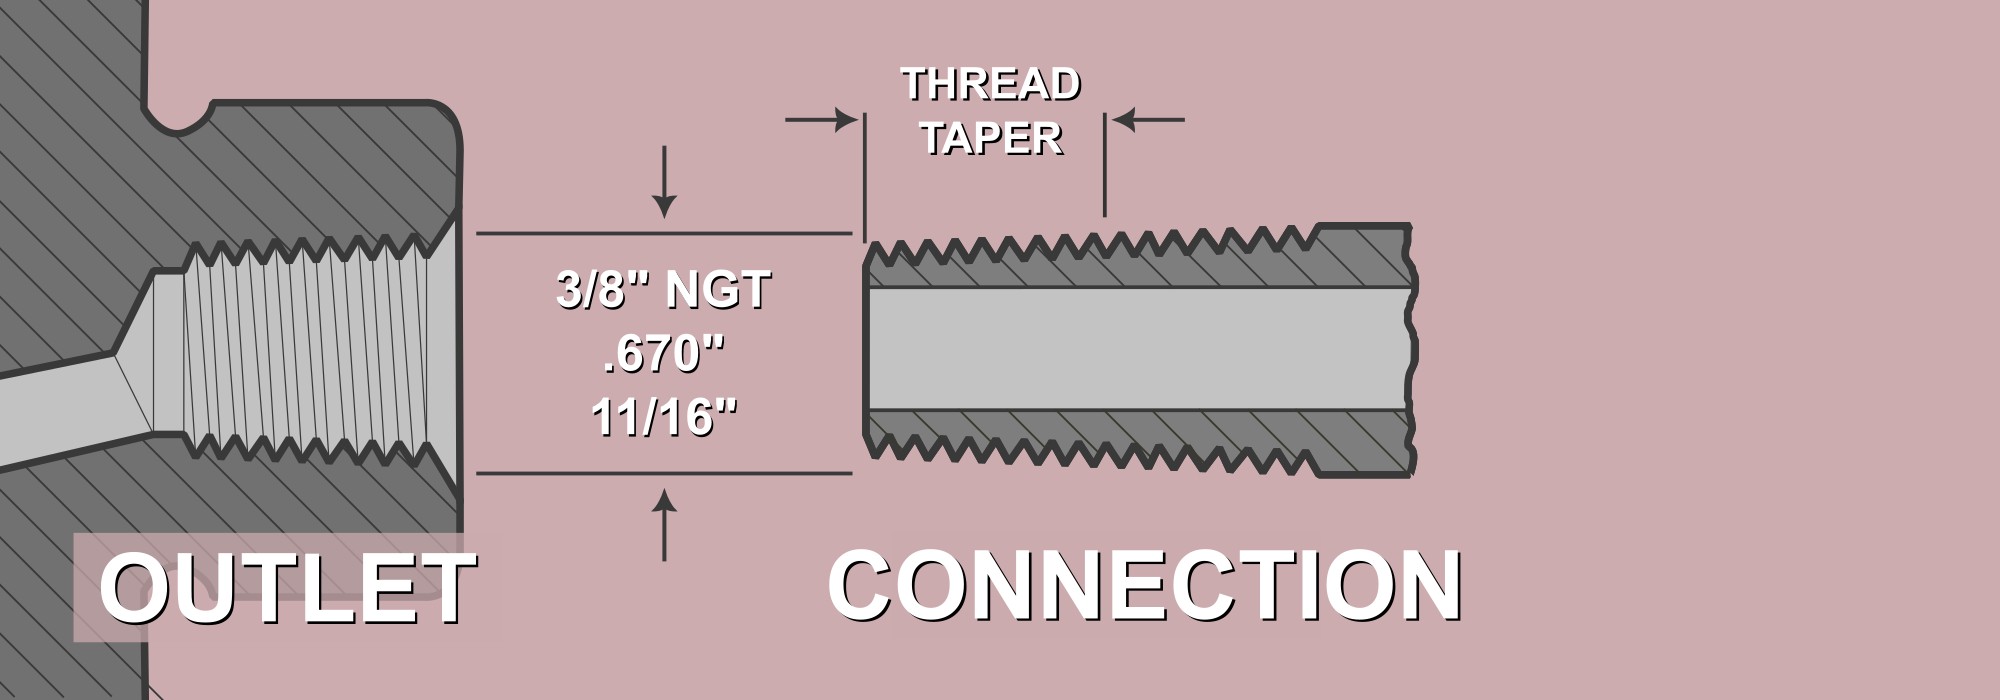 a basic visual aid depicting a CGA240 connection